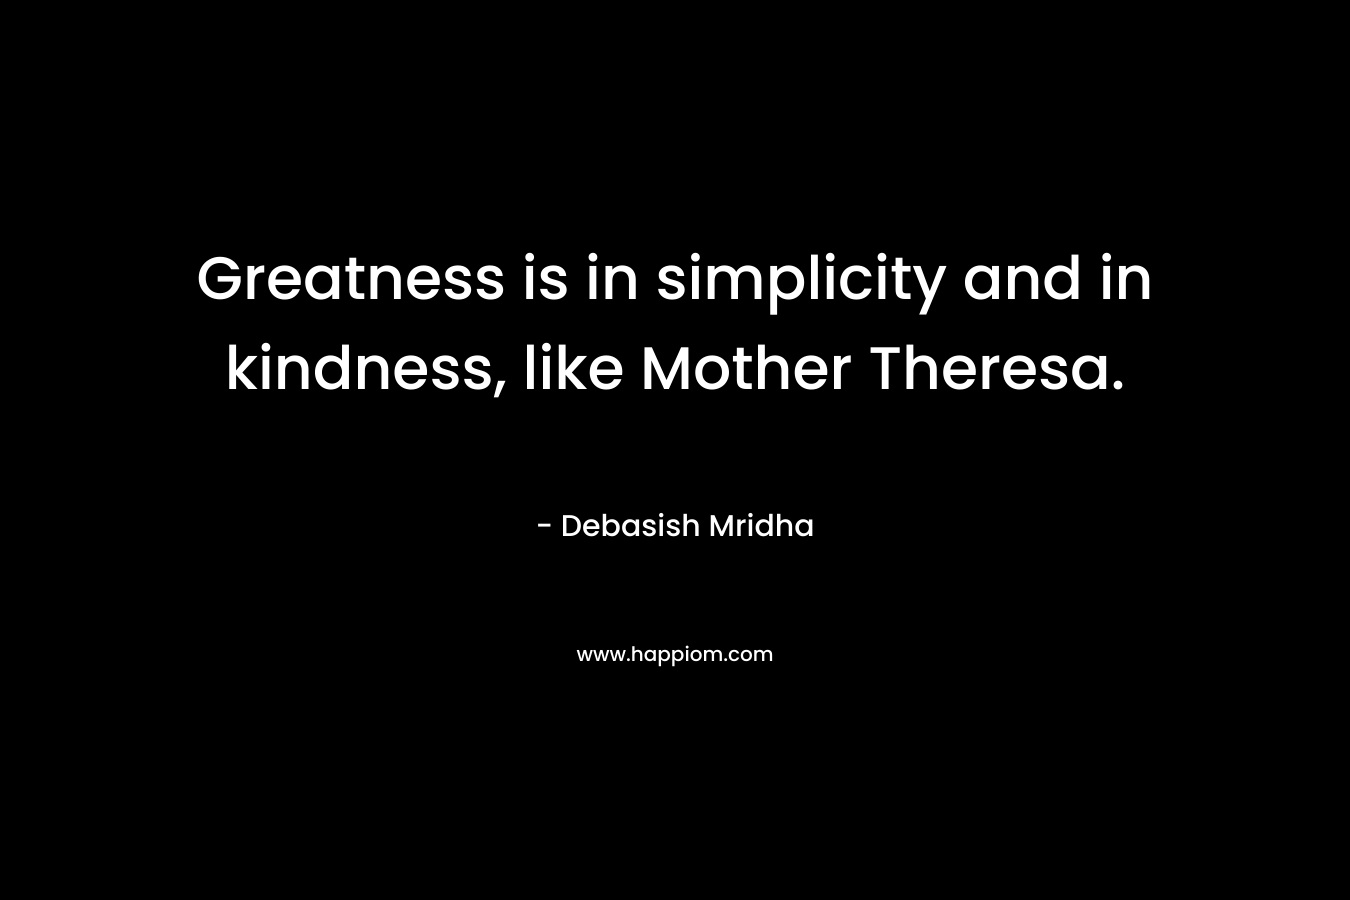 Greatness is in simplicity and in kindness, like Mother Theresa. – Debasish Mridha